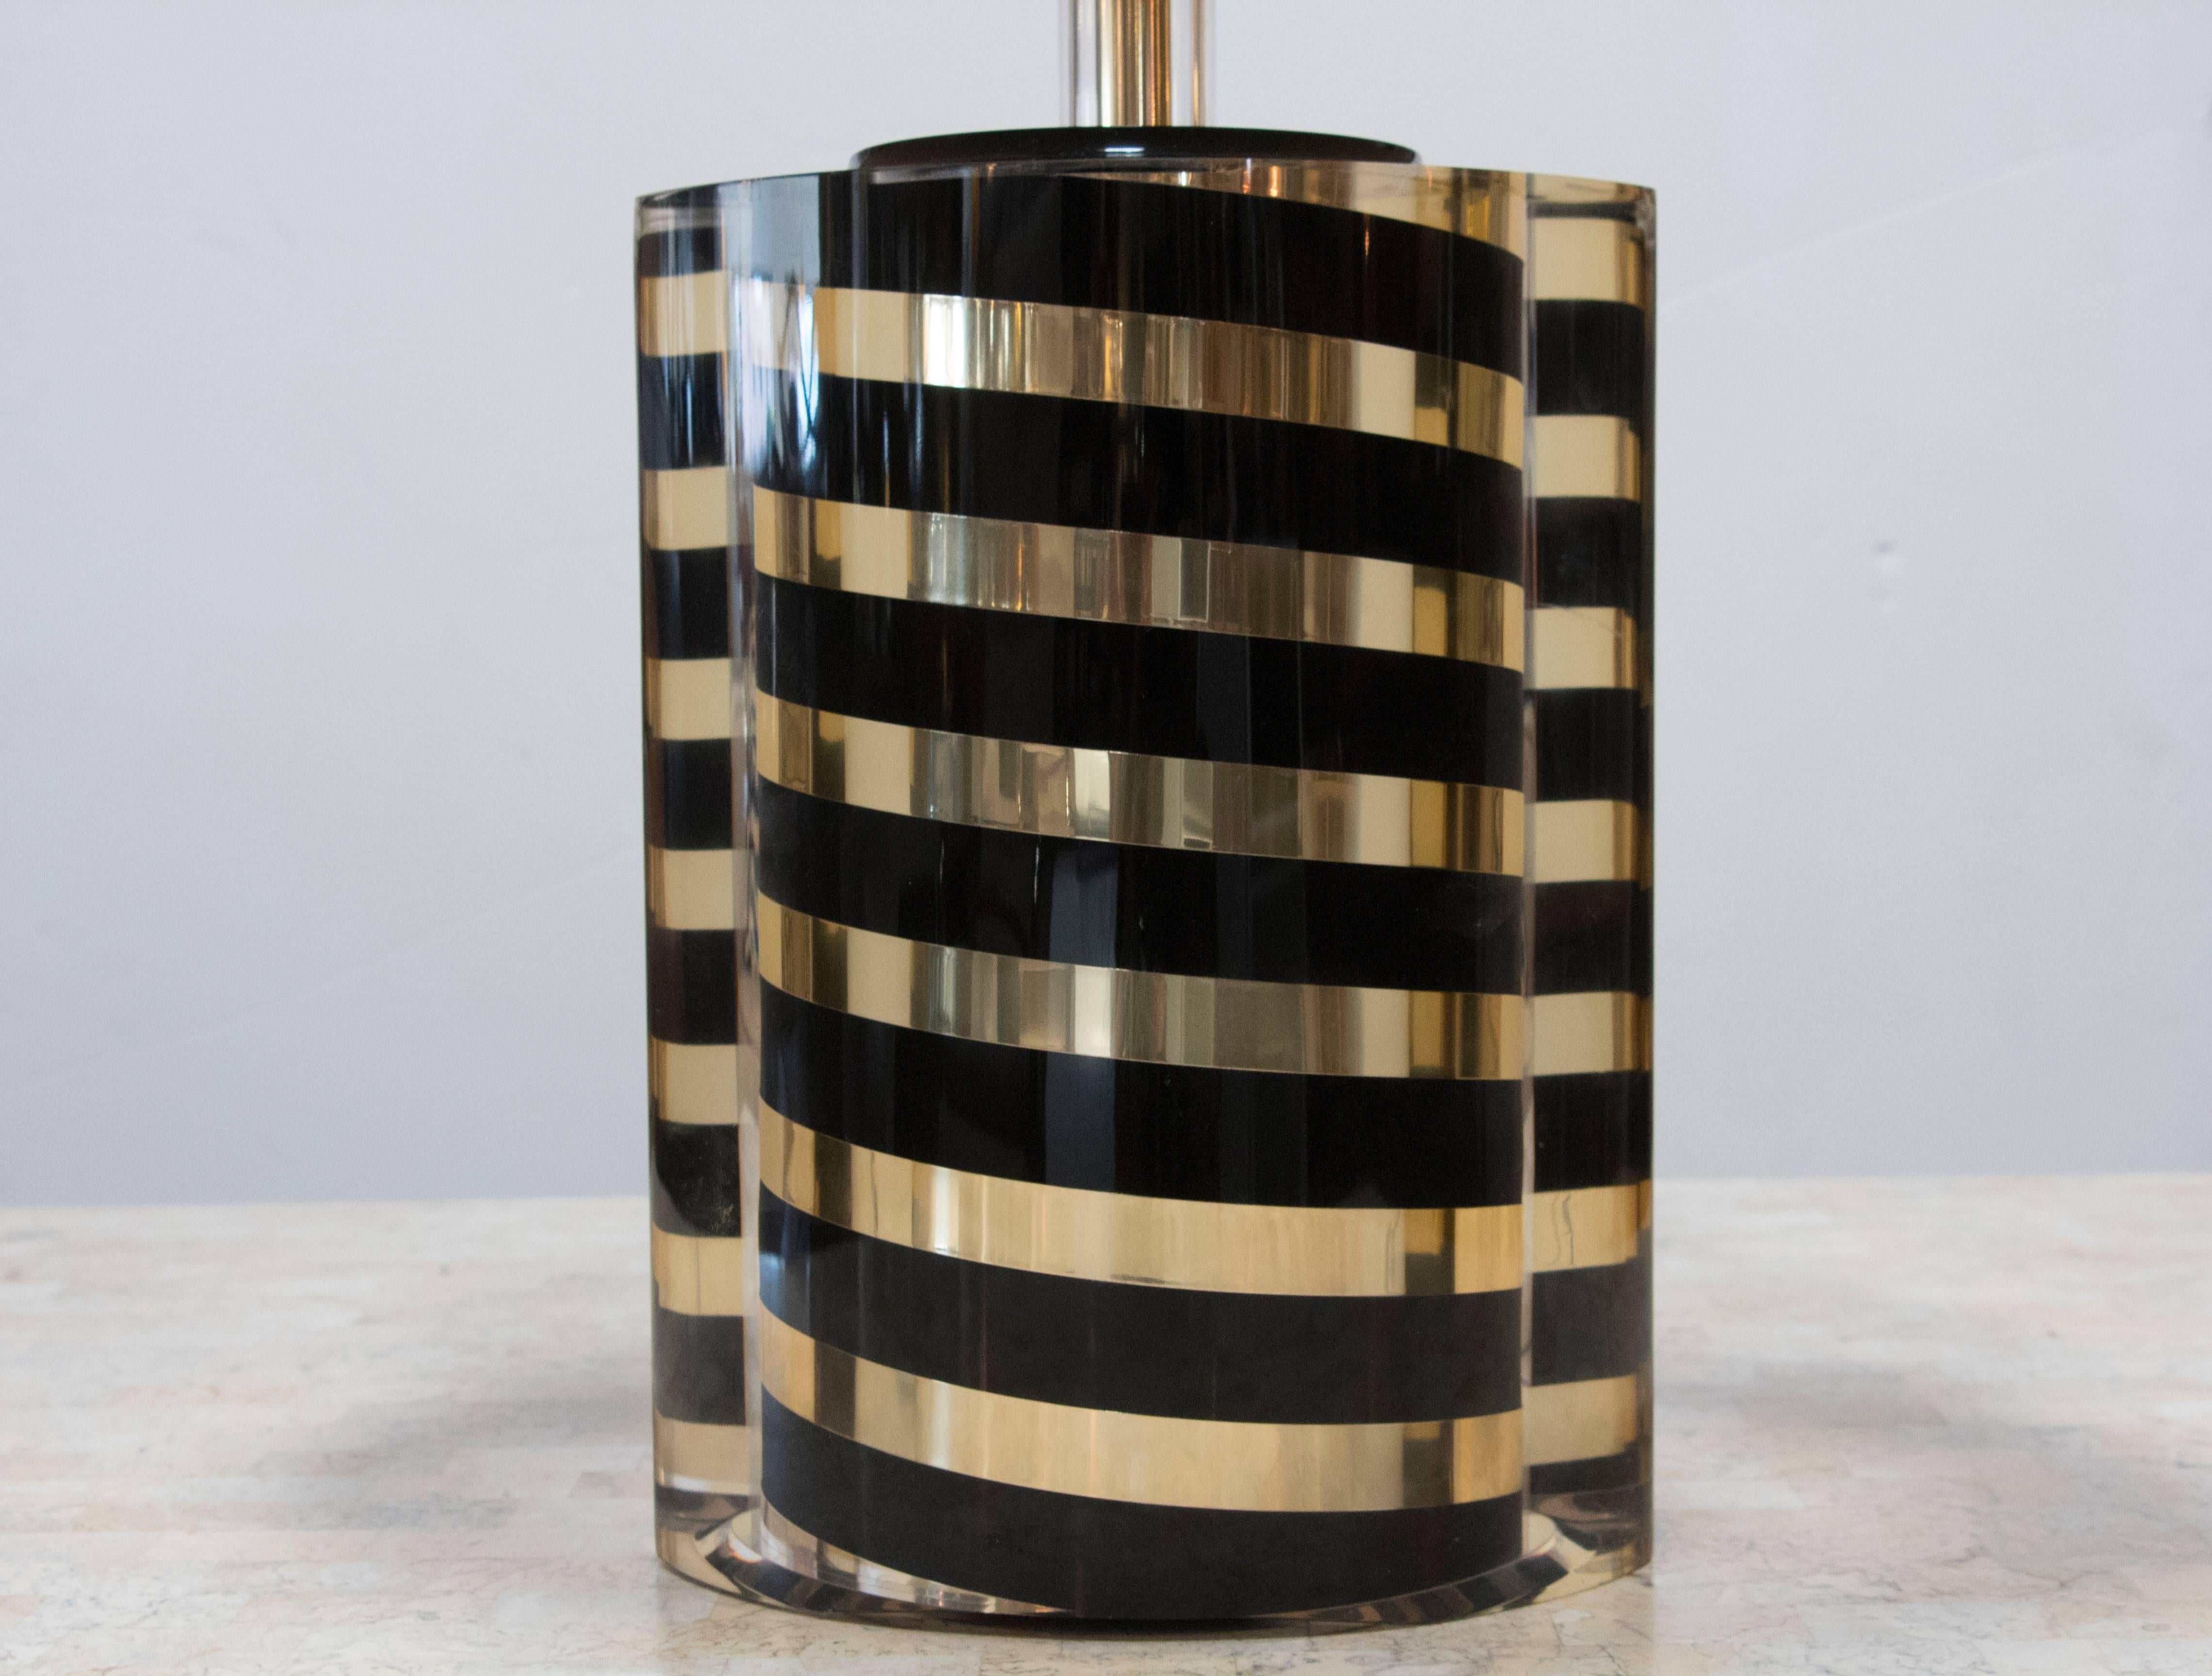 Black and gold diagonally striped round base is encased in ellipse or almond shaped Lucite. The difference in the two shapes causes a slight distortion in the appearance in photos - what is really a reflection appears as if the outer surface is